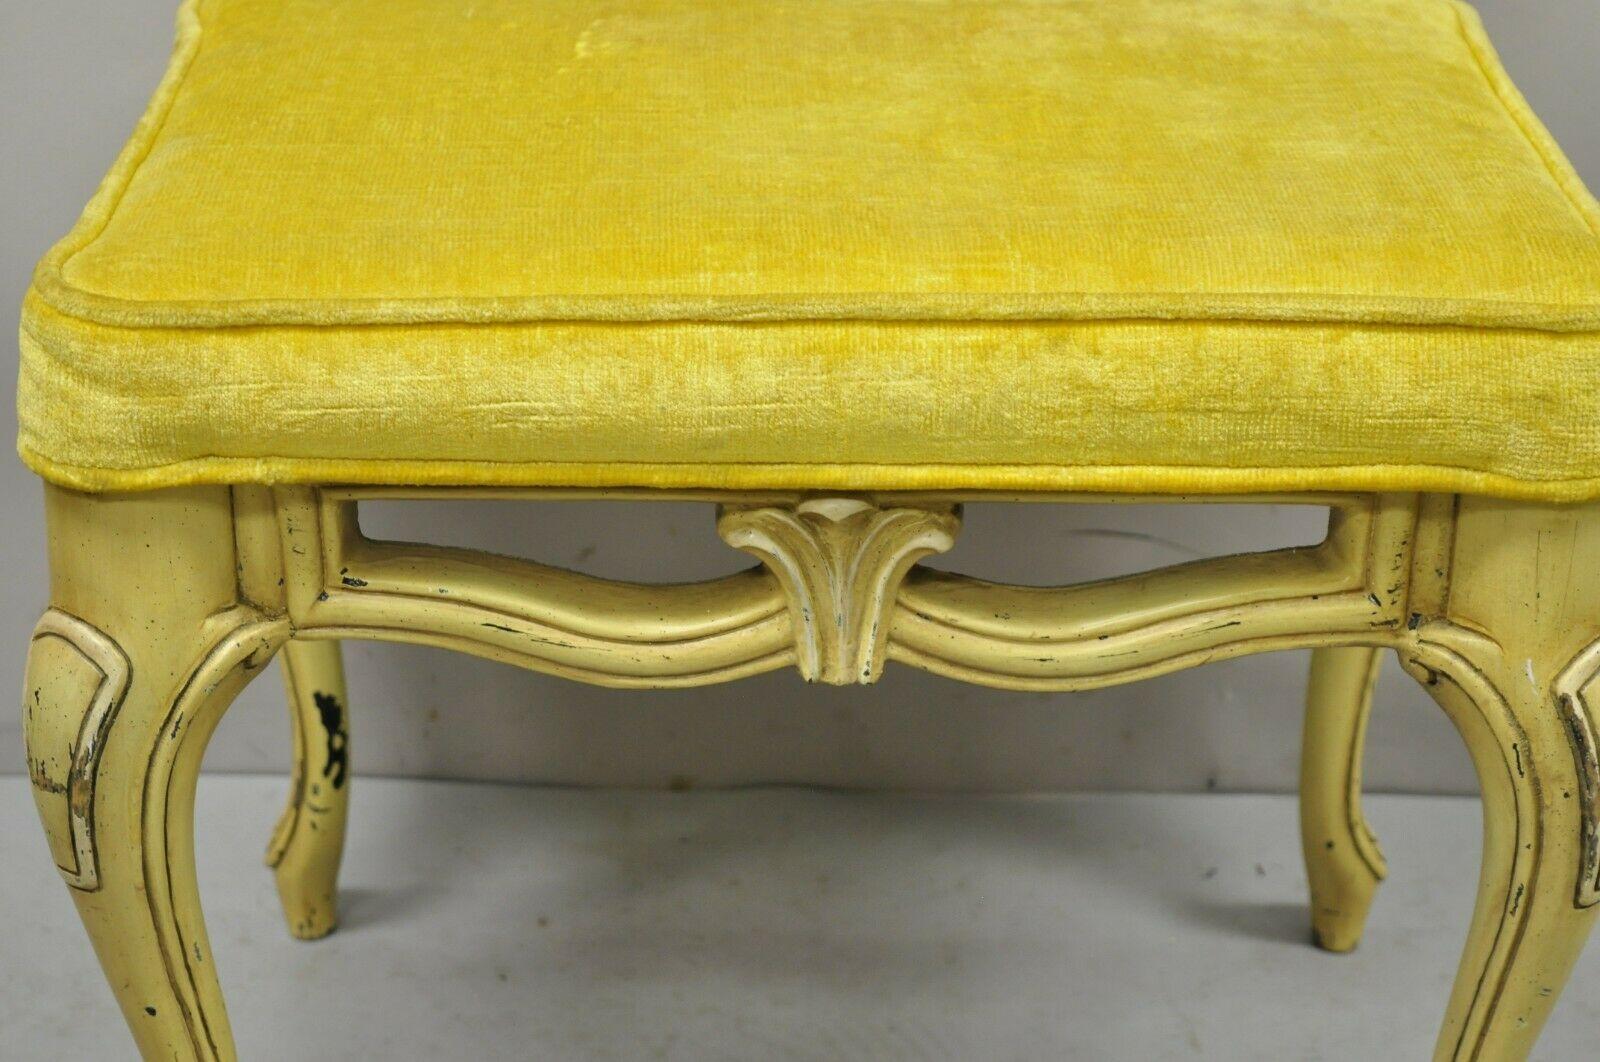 American Vintage French Provincial Yellow Painted Cabriole Leg Vanity Bench Seat For Sale